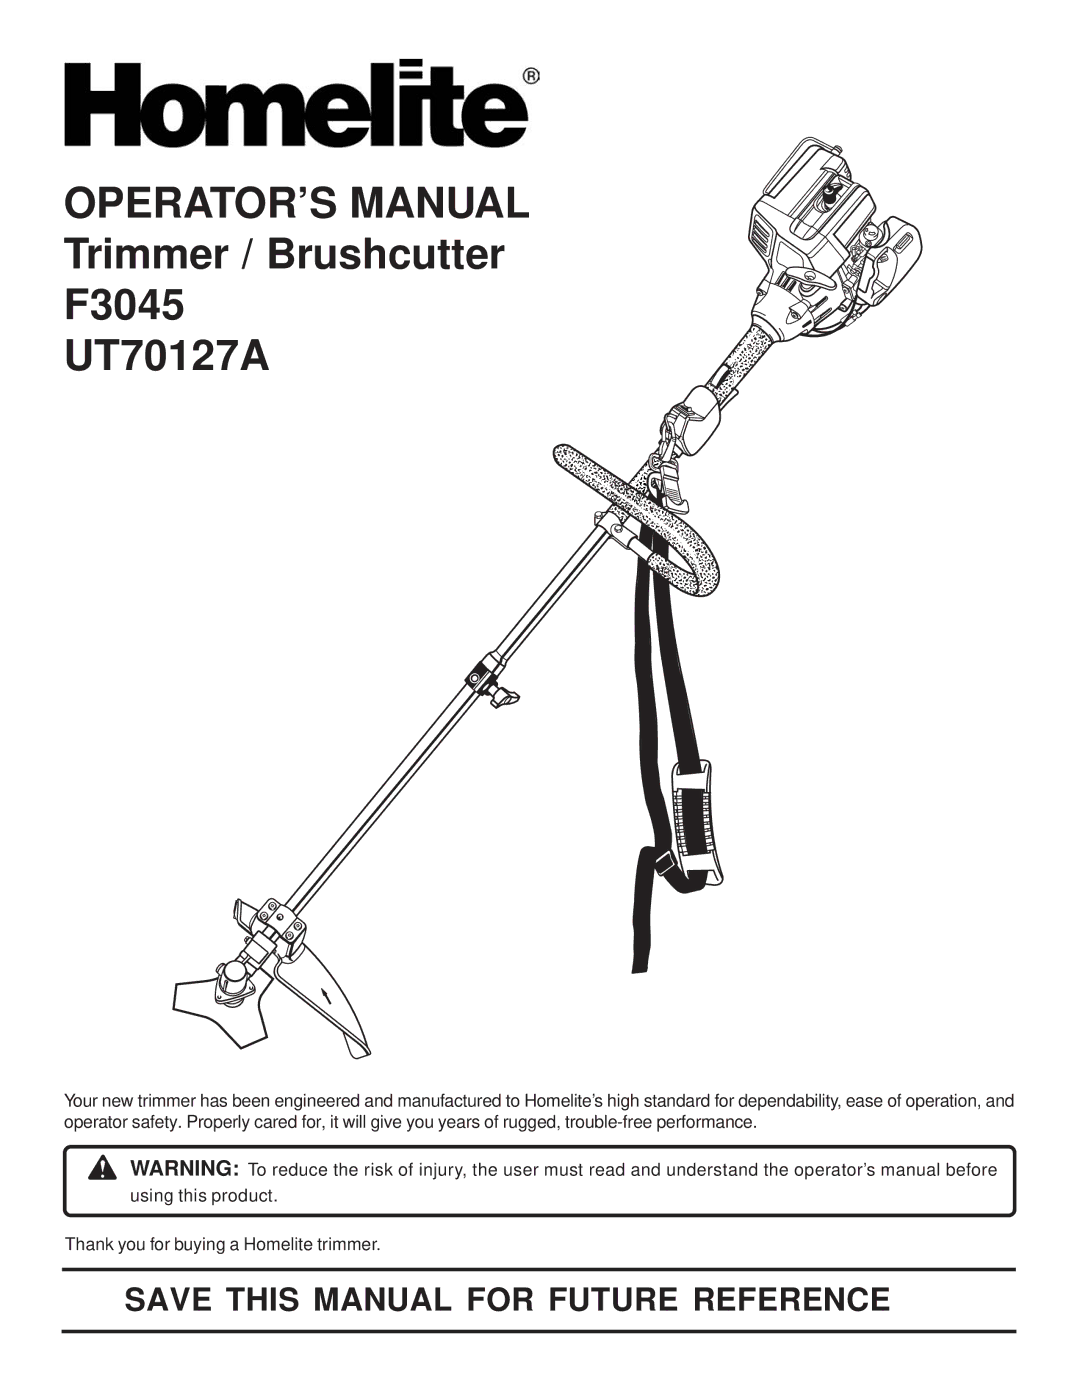 Homelite UT70127A manual OPERATOR’S Manual, Save this Manual for Future Reference 